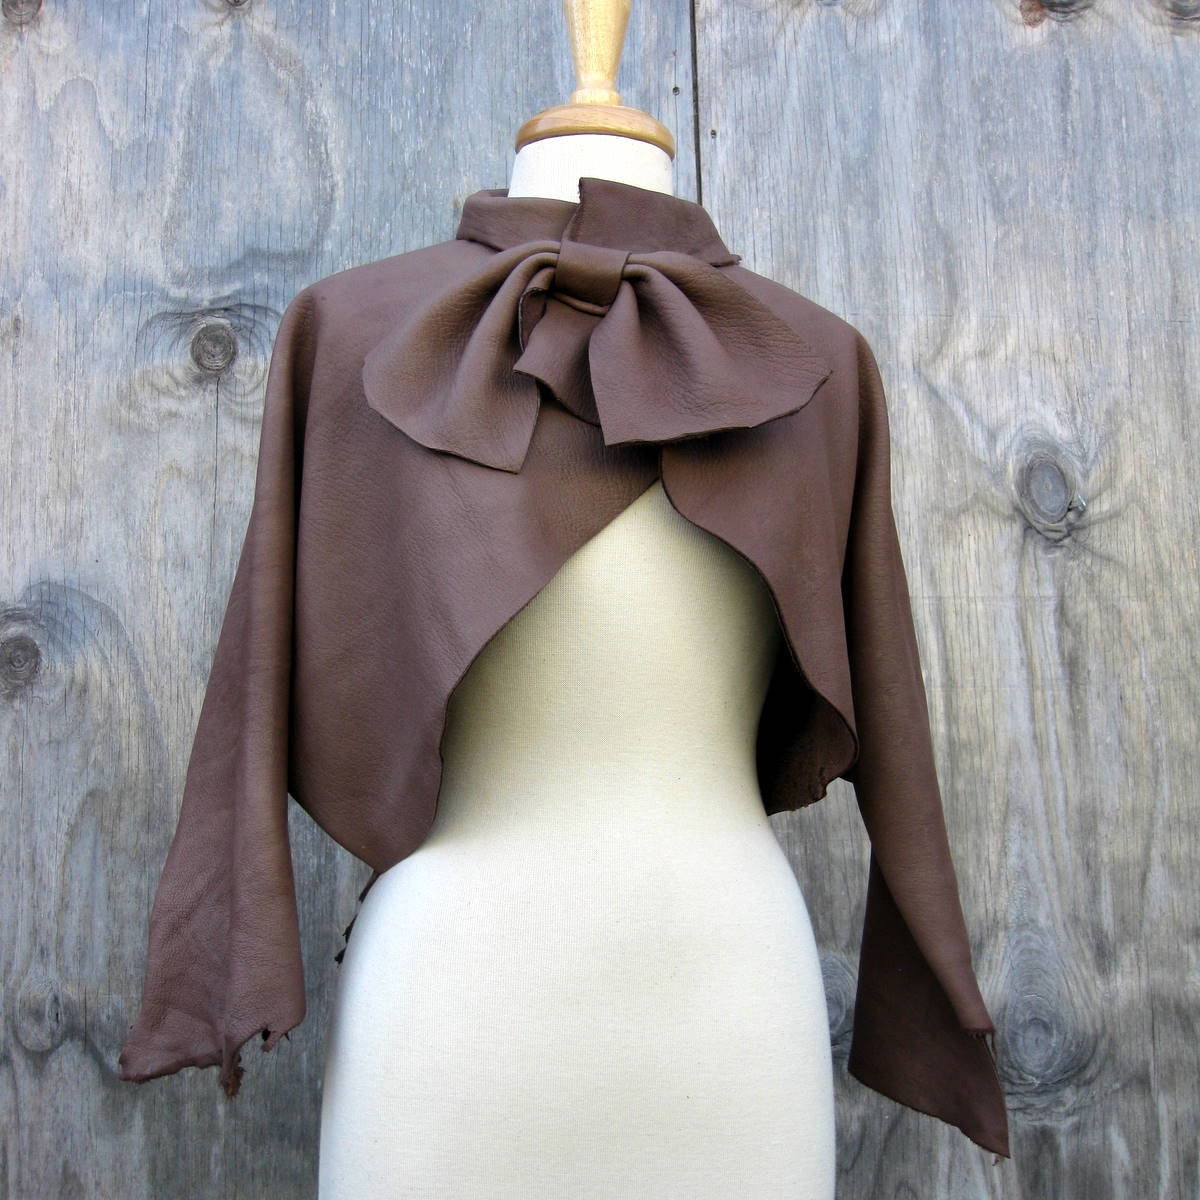 Leather Jacket Coatee Made in Taupe Elkskin By Stacy Leigh Size Small to Medium Ready to Ship OOAK - stacyleigh